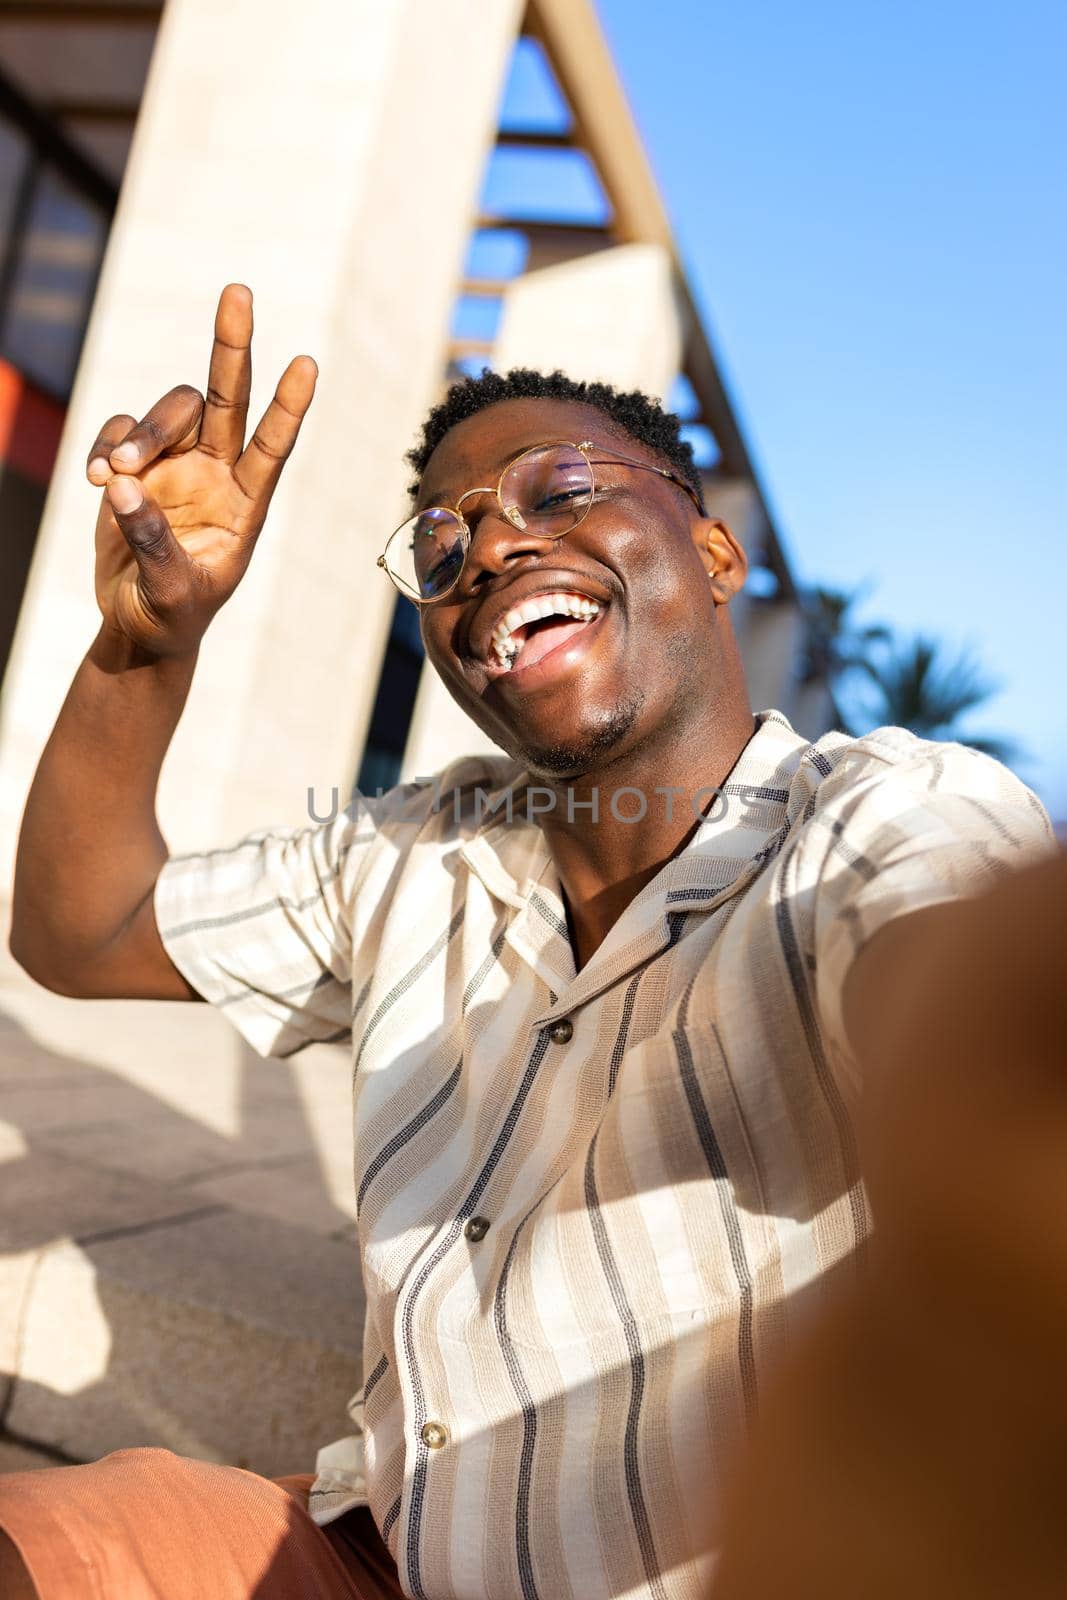 African american man with glasses taking selfie outdoors looking at camera making peace sign. Vertical image. Lifestyle concept.